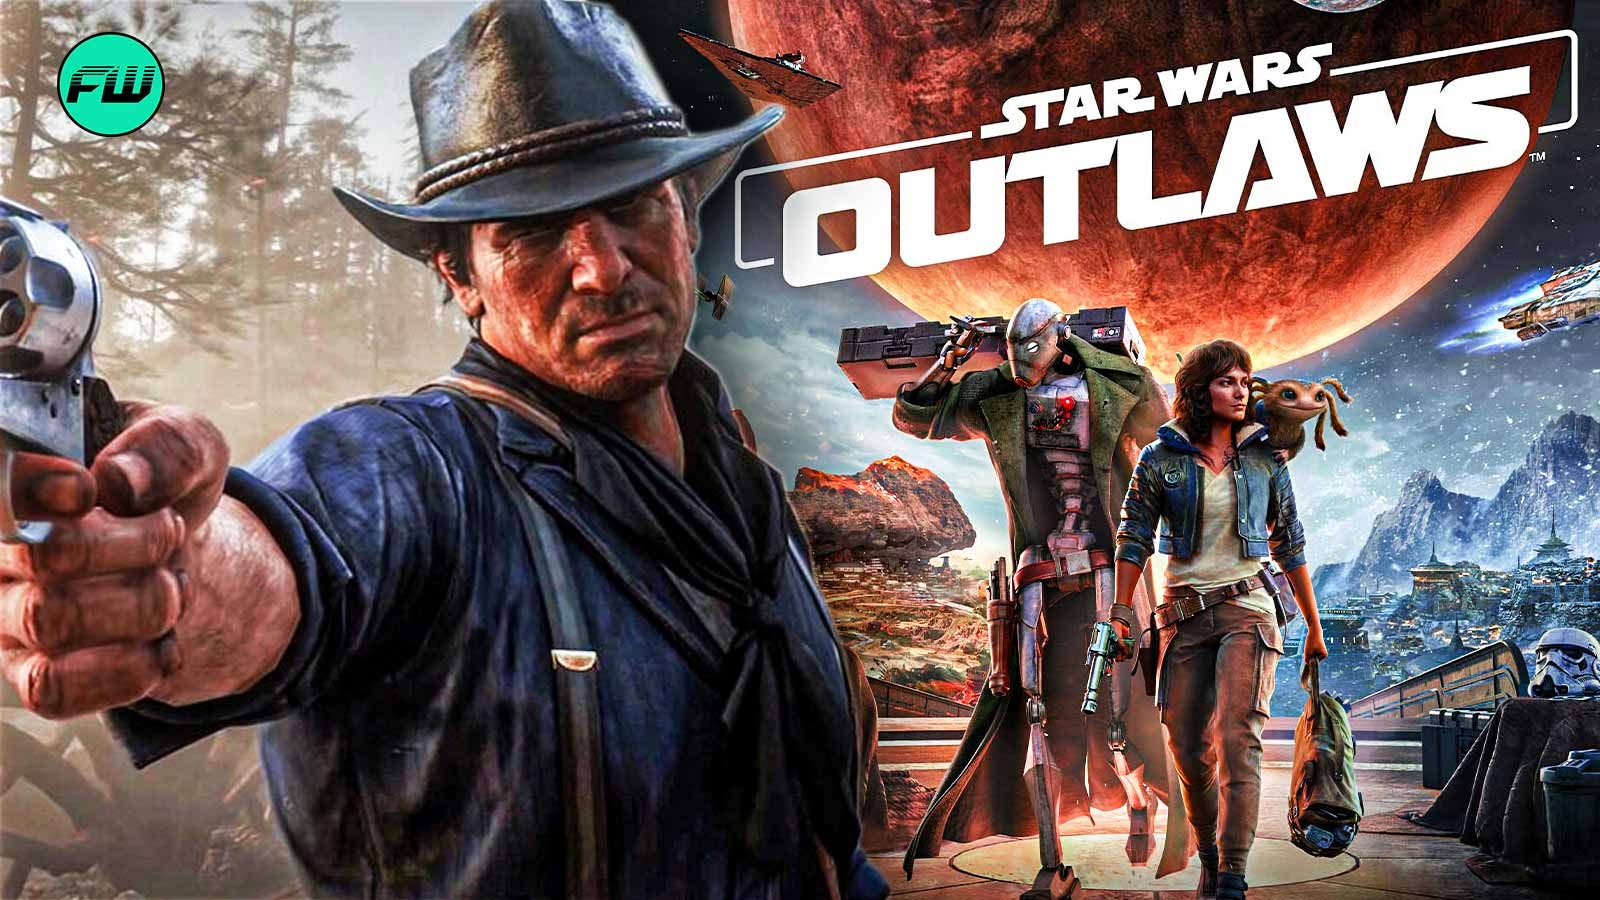 RDR2 and Star Wars Outlaws